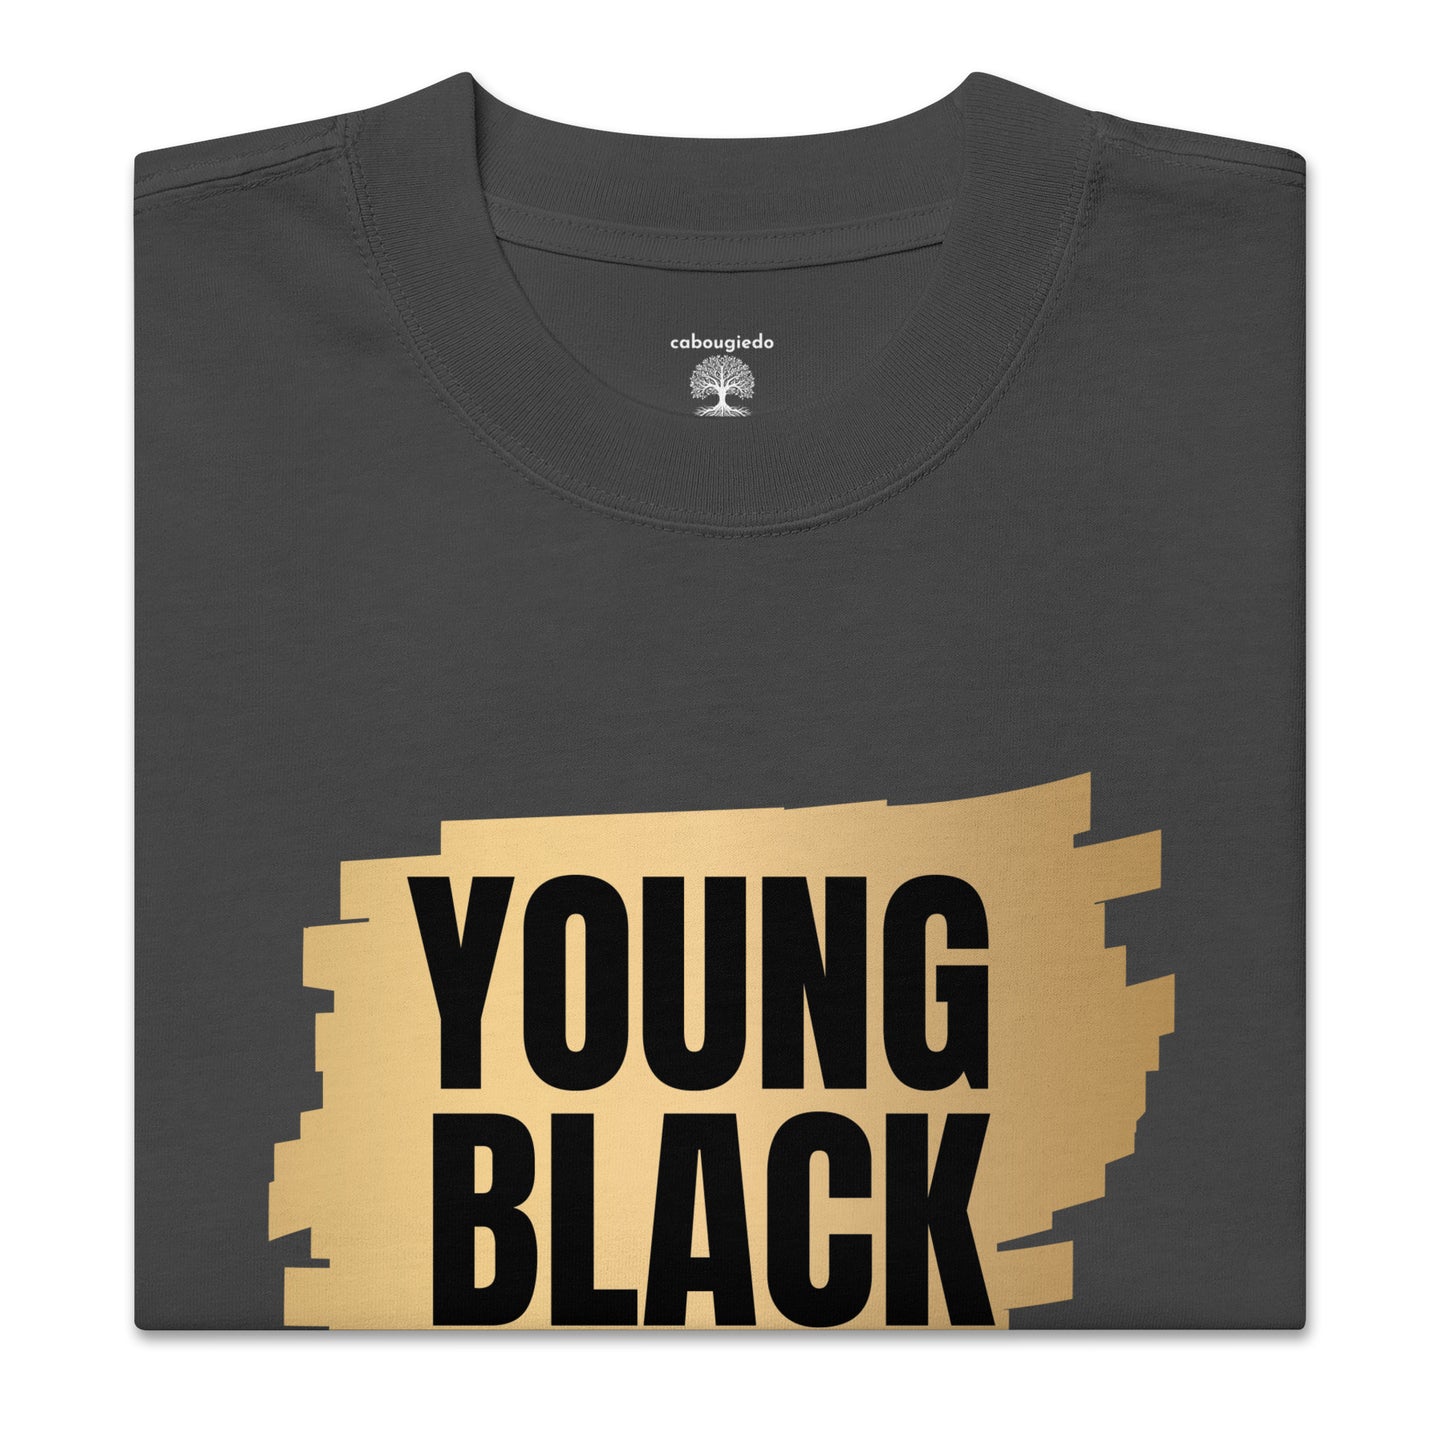 Oversized faded t-shirt - Juneteenth Young Gifted and Freeish 1865